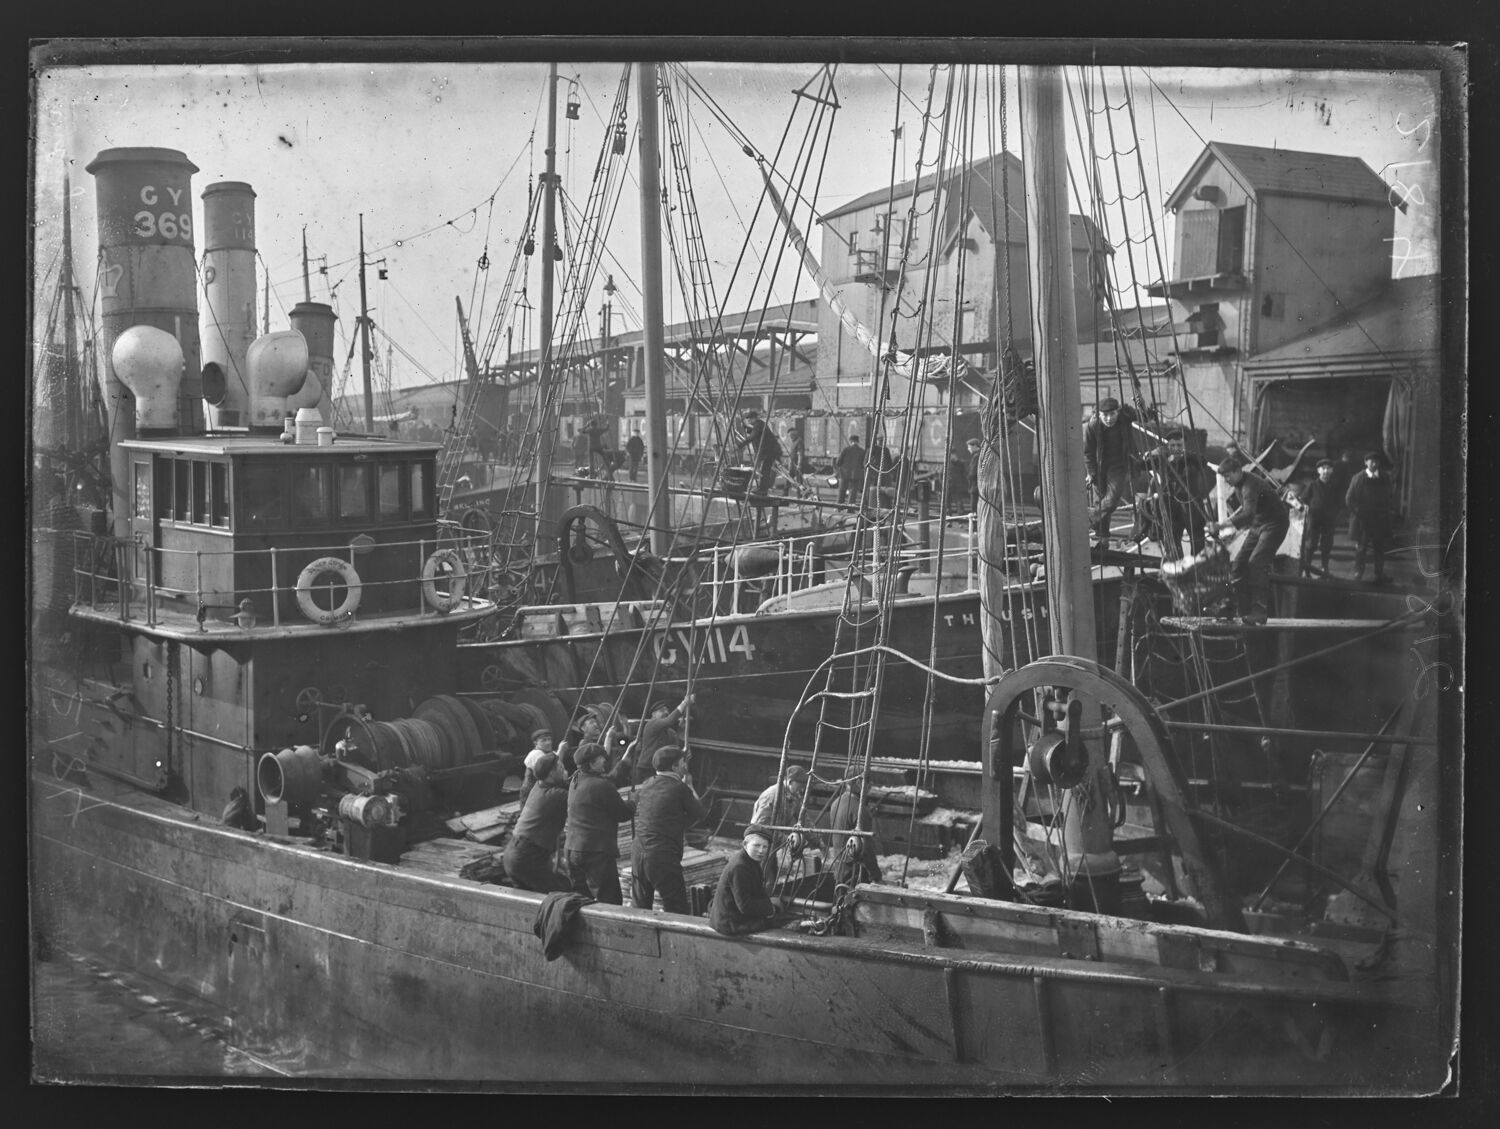 Steam Trawlers GY369 & GY114 Thrush In Dock, Fleetwood